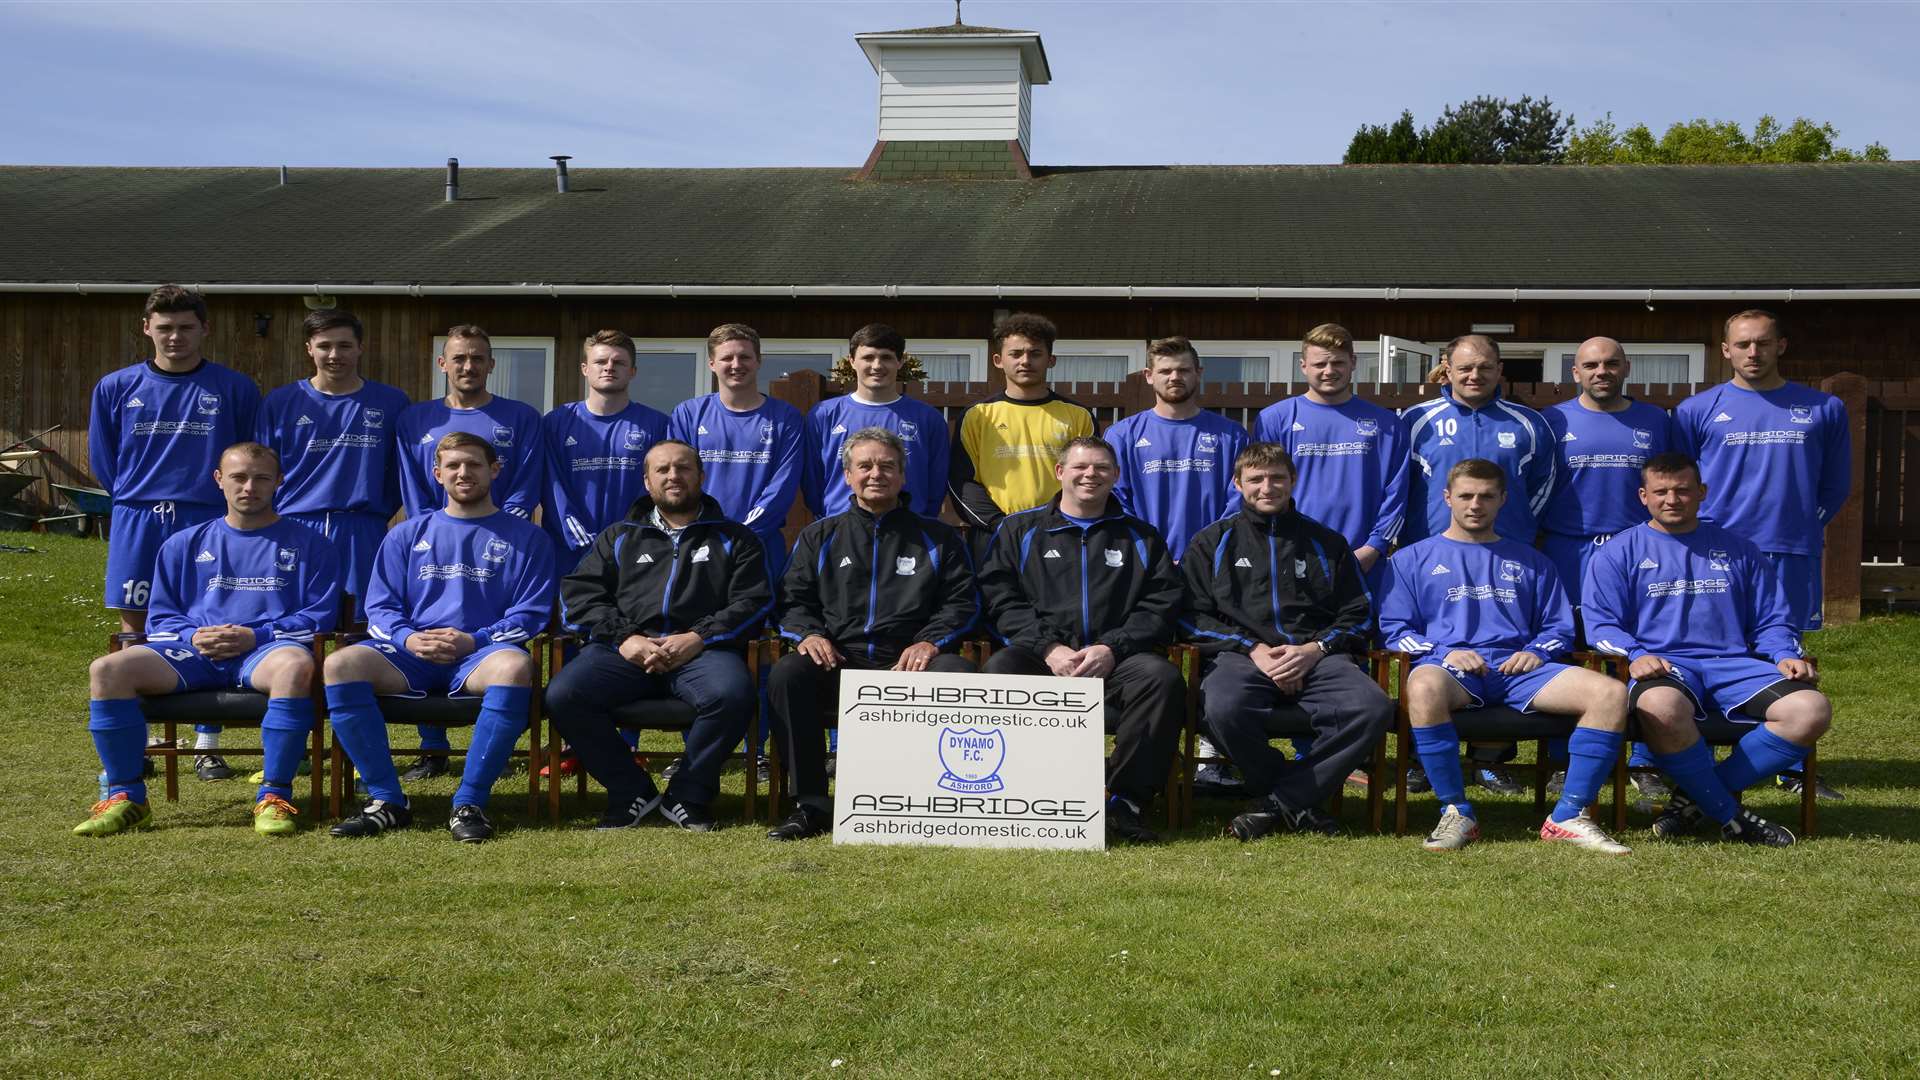 Ashford Dynamo team photo at Sandy Acres. Andy Hone is back row third from the left. Pic by Paul Amos.